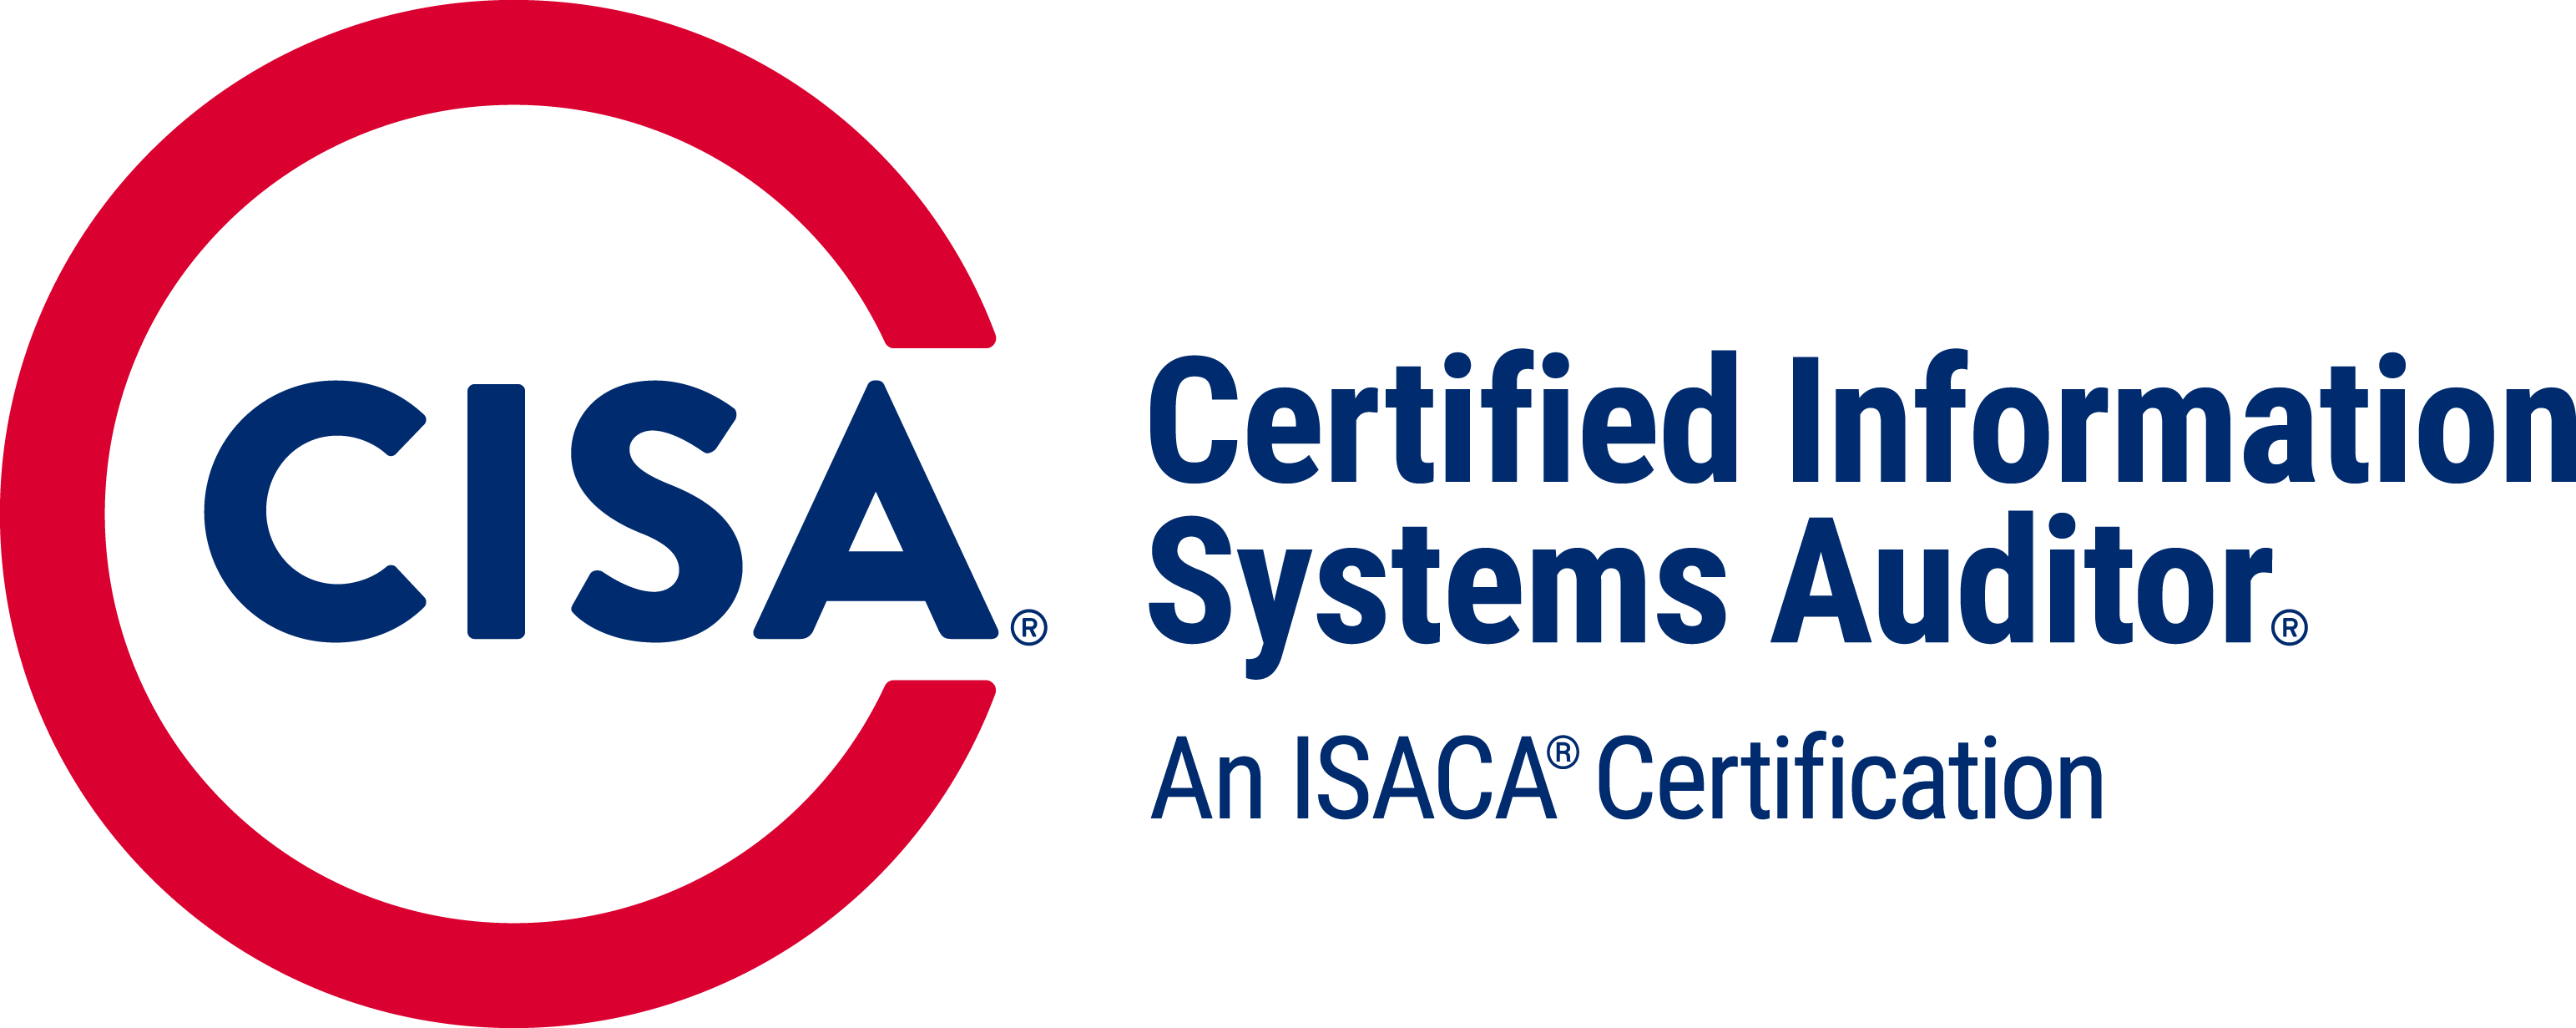 Official ISACA logo for CISA - Certified Information Systems Auditor